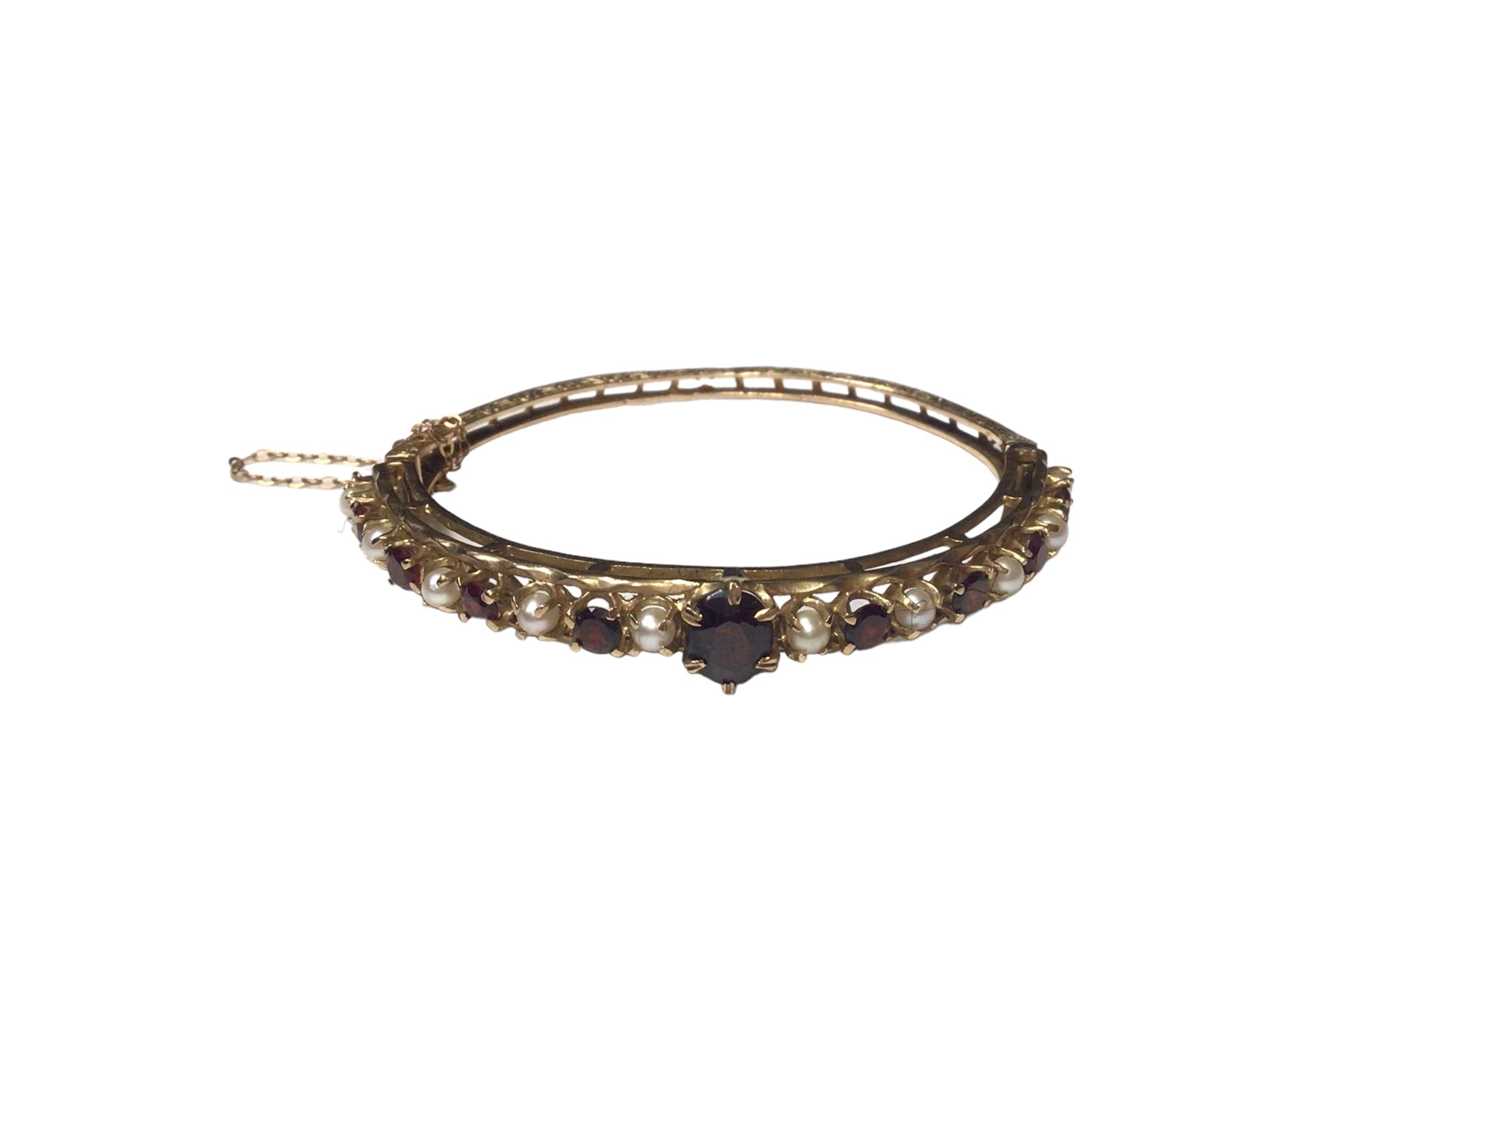 Victorian style 9ct gold garnet and cultured pearl hinged bangle